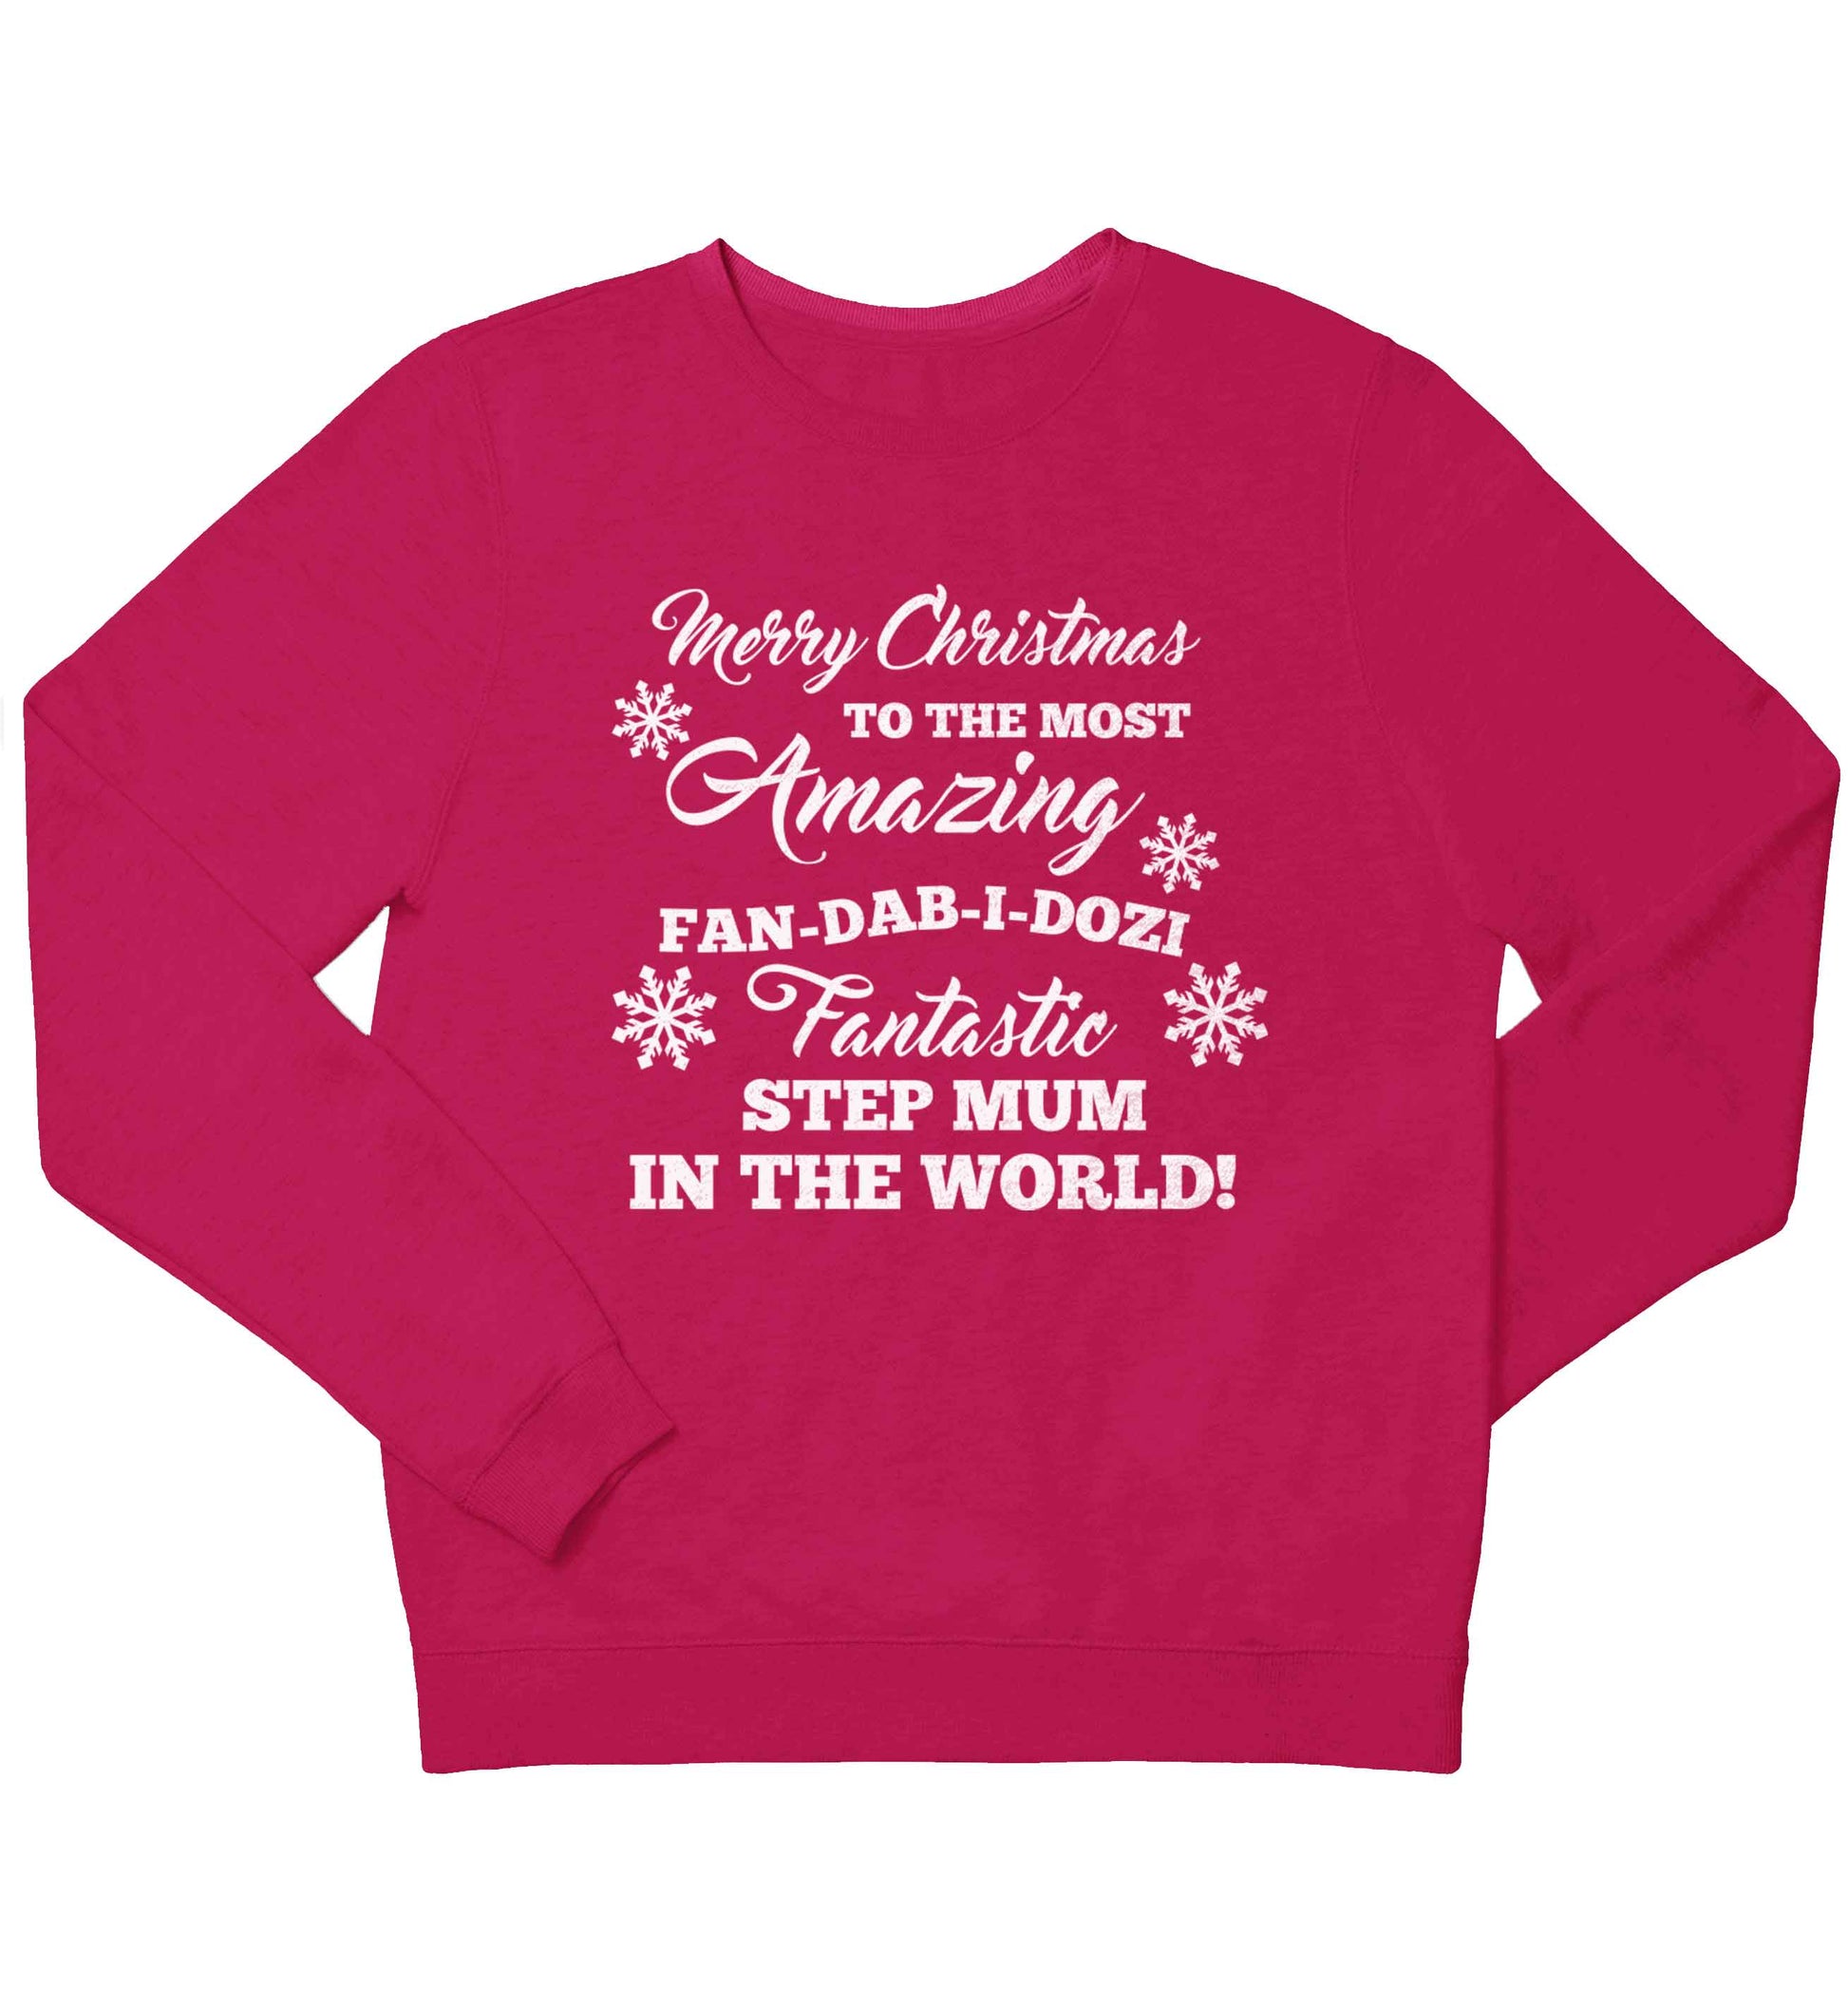 Merry Christmas to the most amazing fan-dab-i-dozi fantasic Step Mum in the world children's pink sweater 12-13 Years